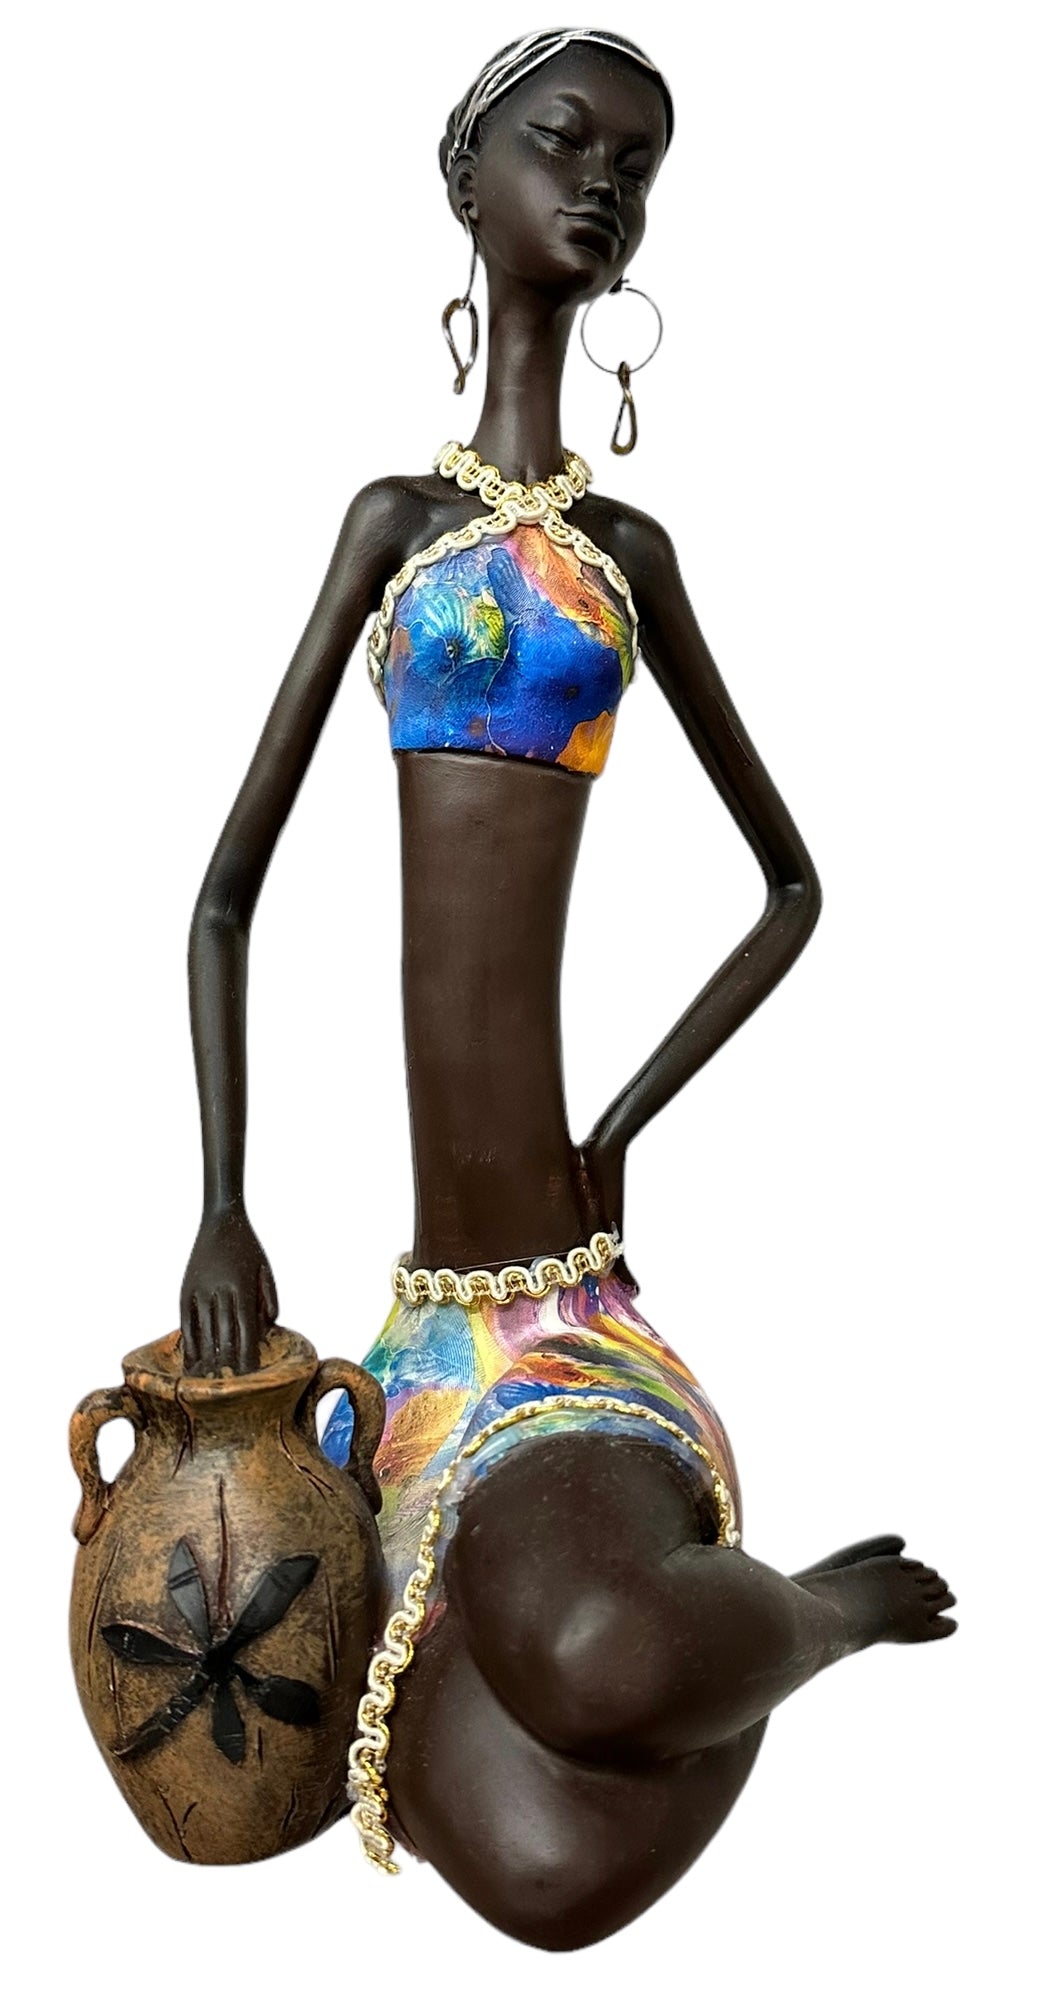 African figurine woman with vase